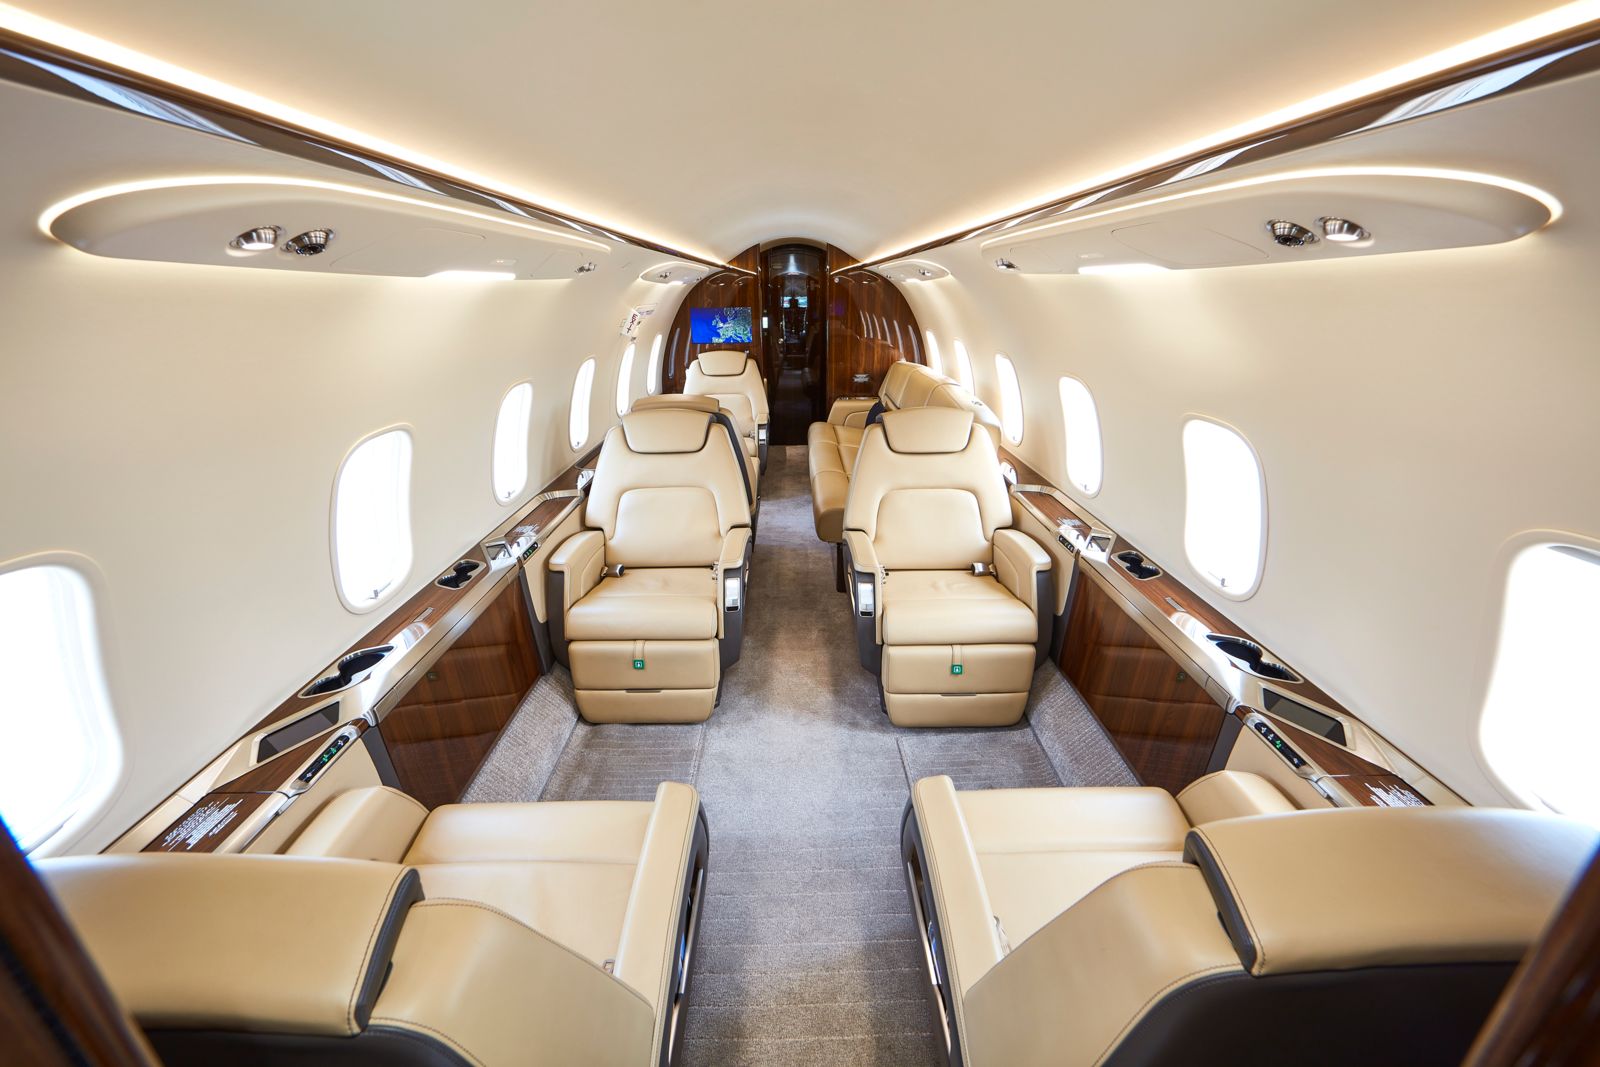 Bombardier CL 350/3500  S/N 20745 for sale | gallery image: /userfiles/images/CL350_sn20745/ca_5955_gj_ap-rdr_ca3_0111.jpg